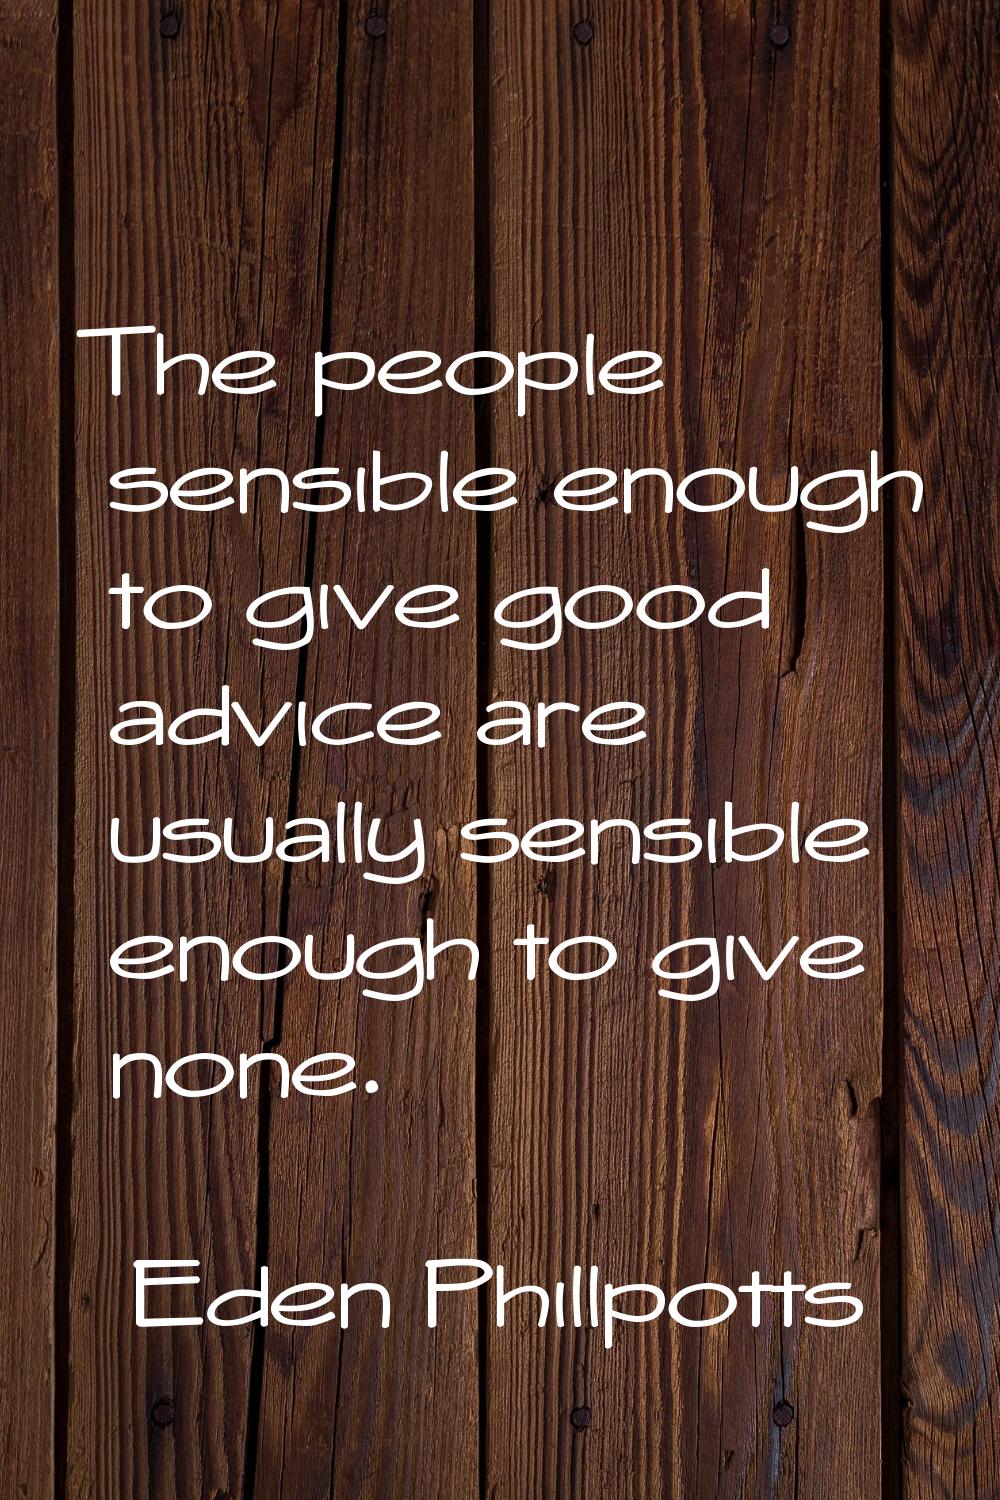 The people sensible enough to give good advice are usually sensible enough to give none.